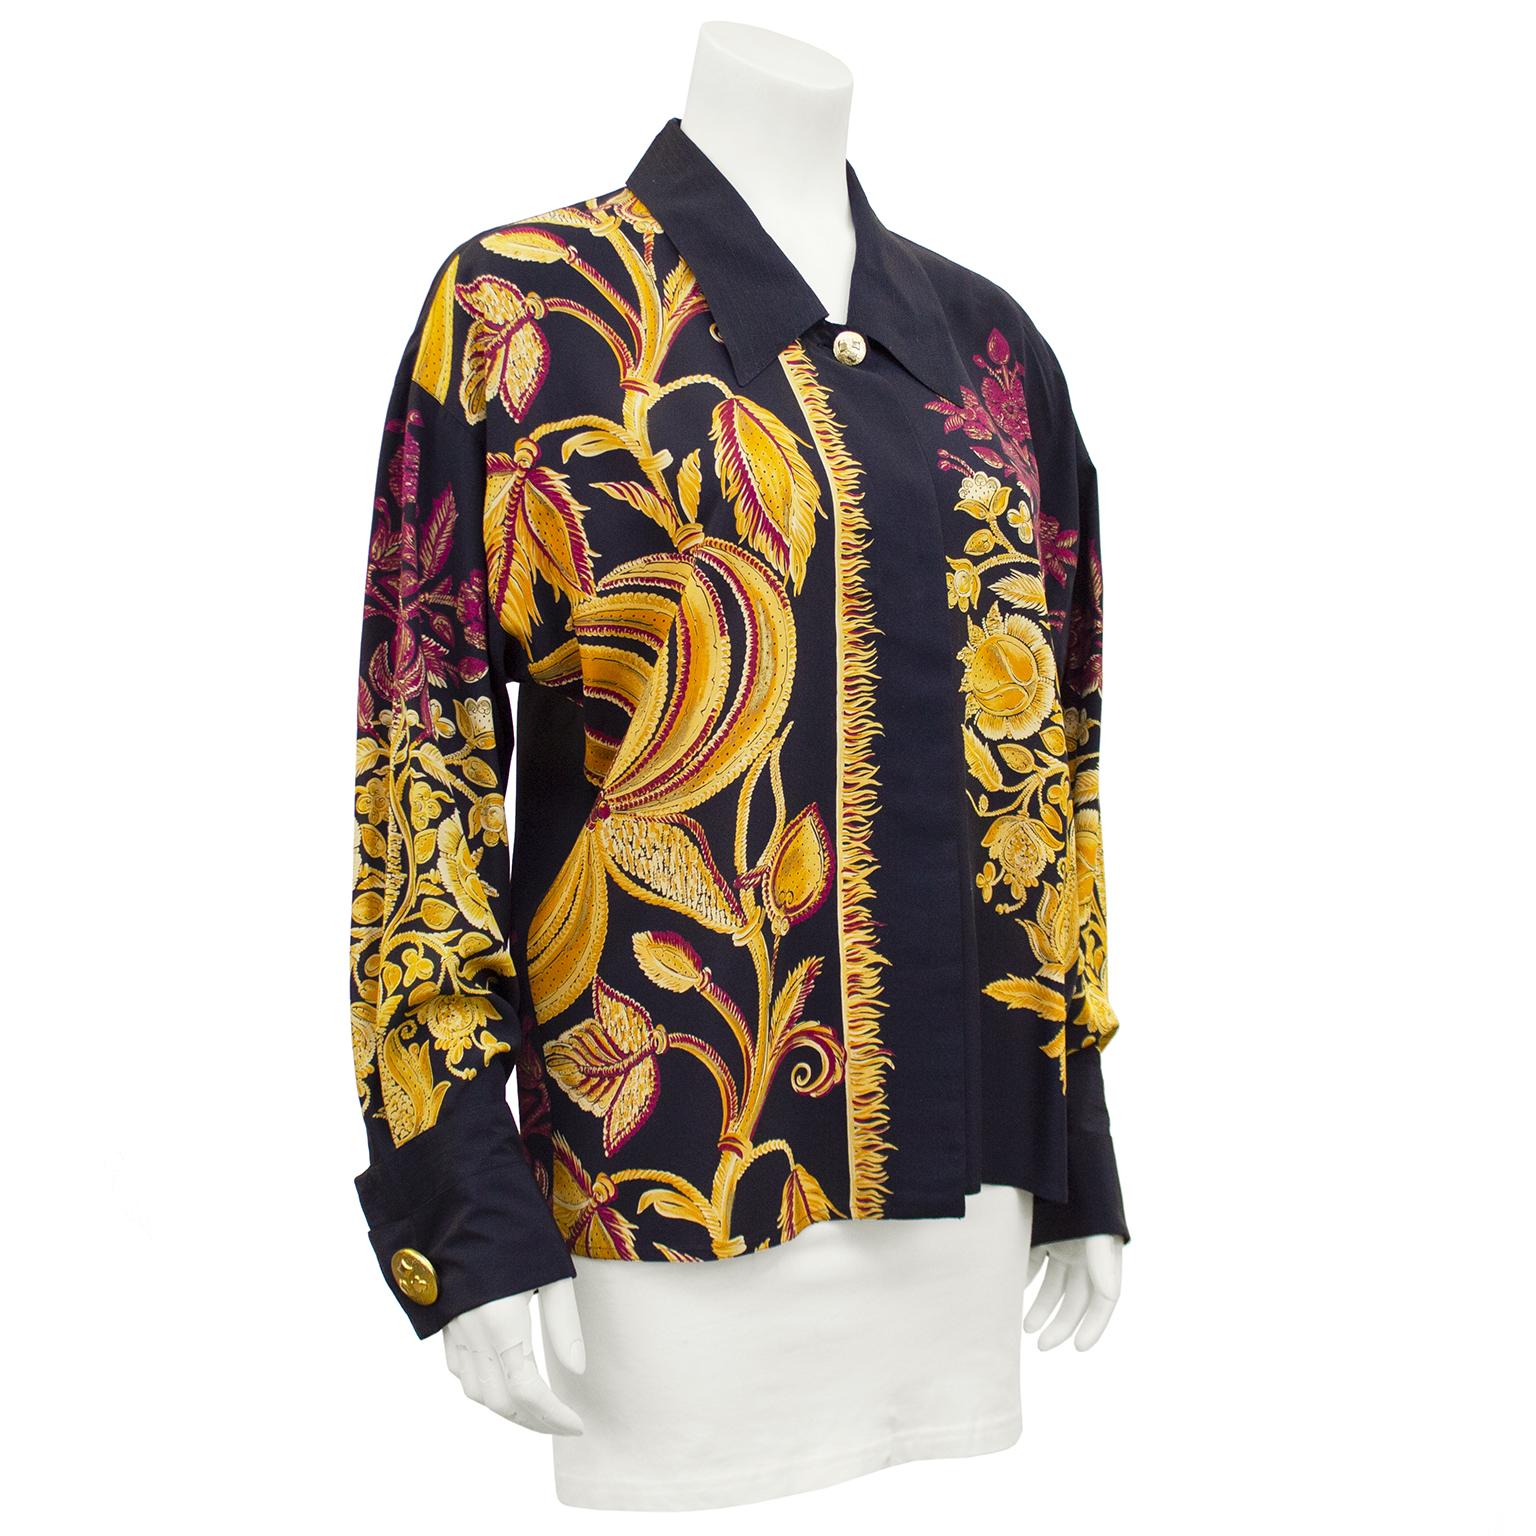 Gianni Versace Couture black label silk shirt from the early 1990s. Black with large gold and maroon baroque style botanical print. Large gold tone button at neck and cuffs, all featuring a diamond, spade and club. Excellent vintage condition, fits